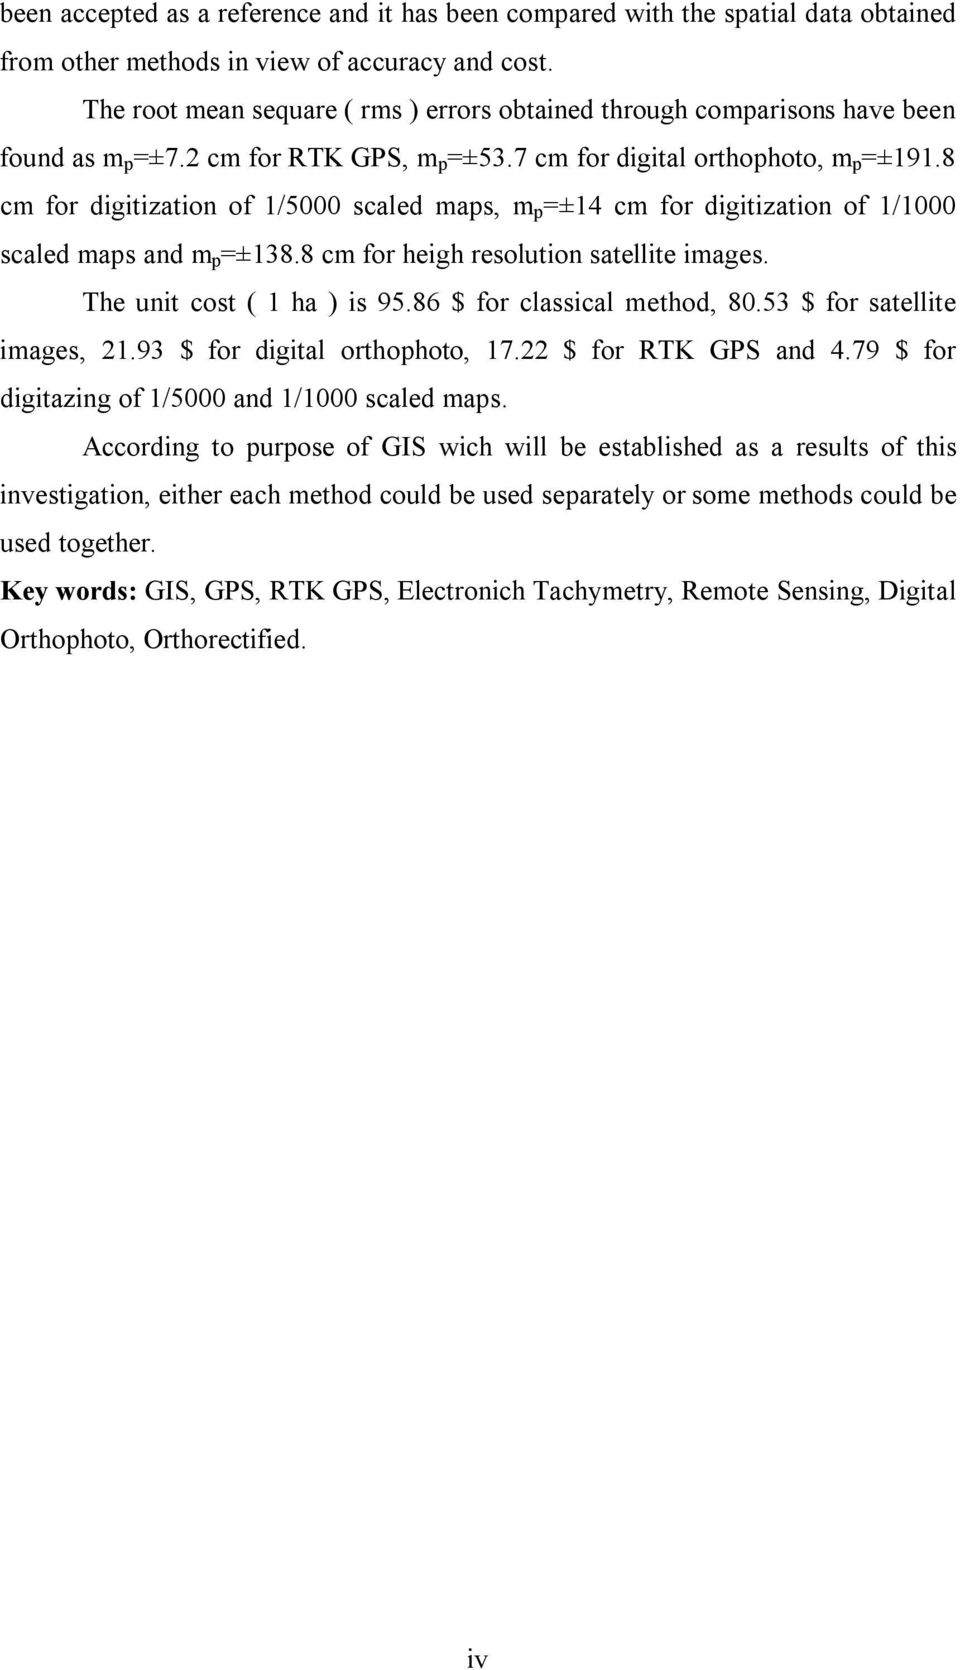 8 cm for digitization of 1/5000 scaled maps, m p =±14 cm for digitization of 1/1000 scaled maps and m p =±138.8 cm for heigh resolution satellite images. The unit cost ( 1 ha ) is 95.